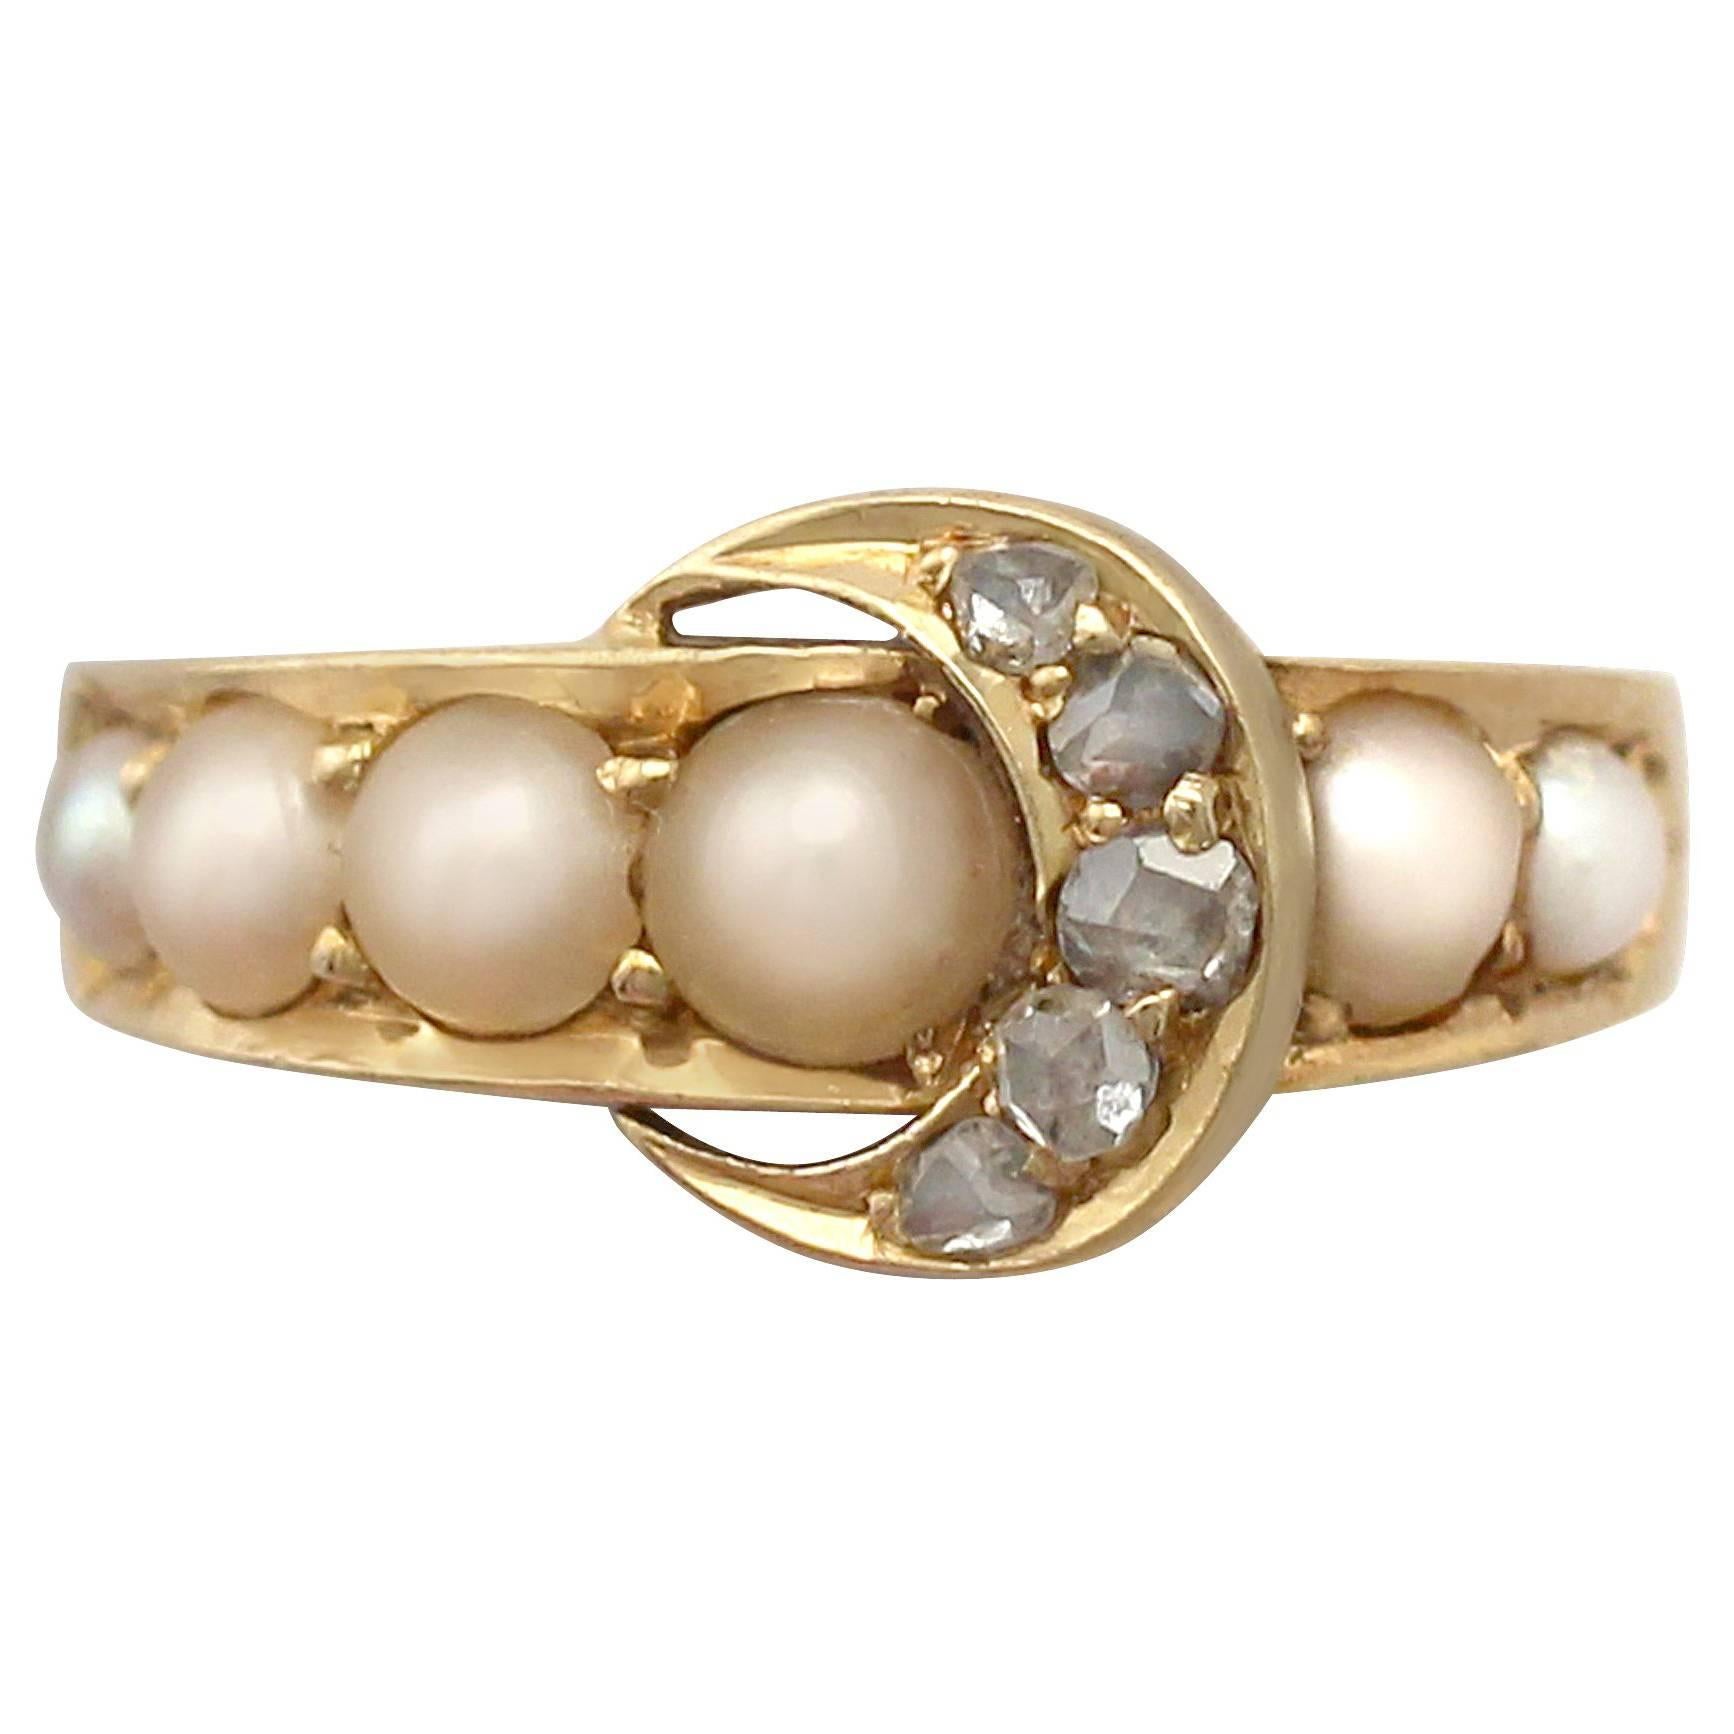 1910s 0.15 Carat Diamond and Pearl, 18 Carat Yellow Gold 'Buckle' Ring